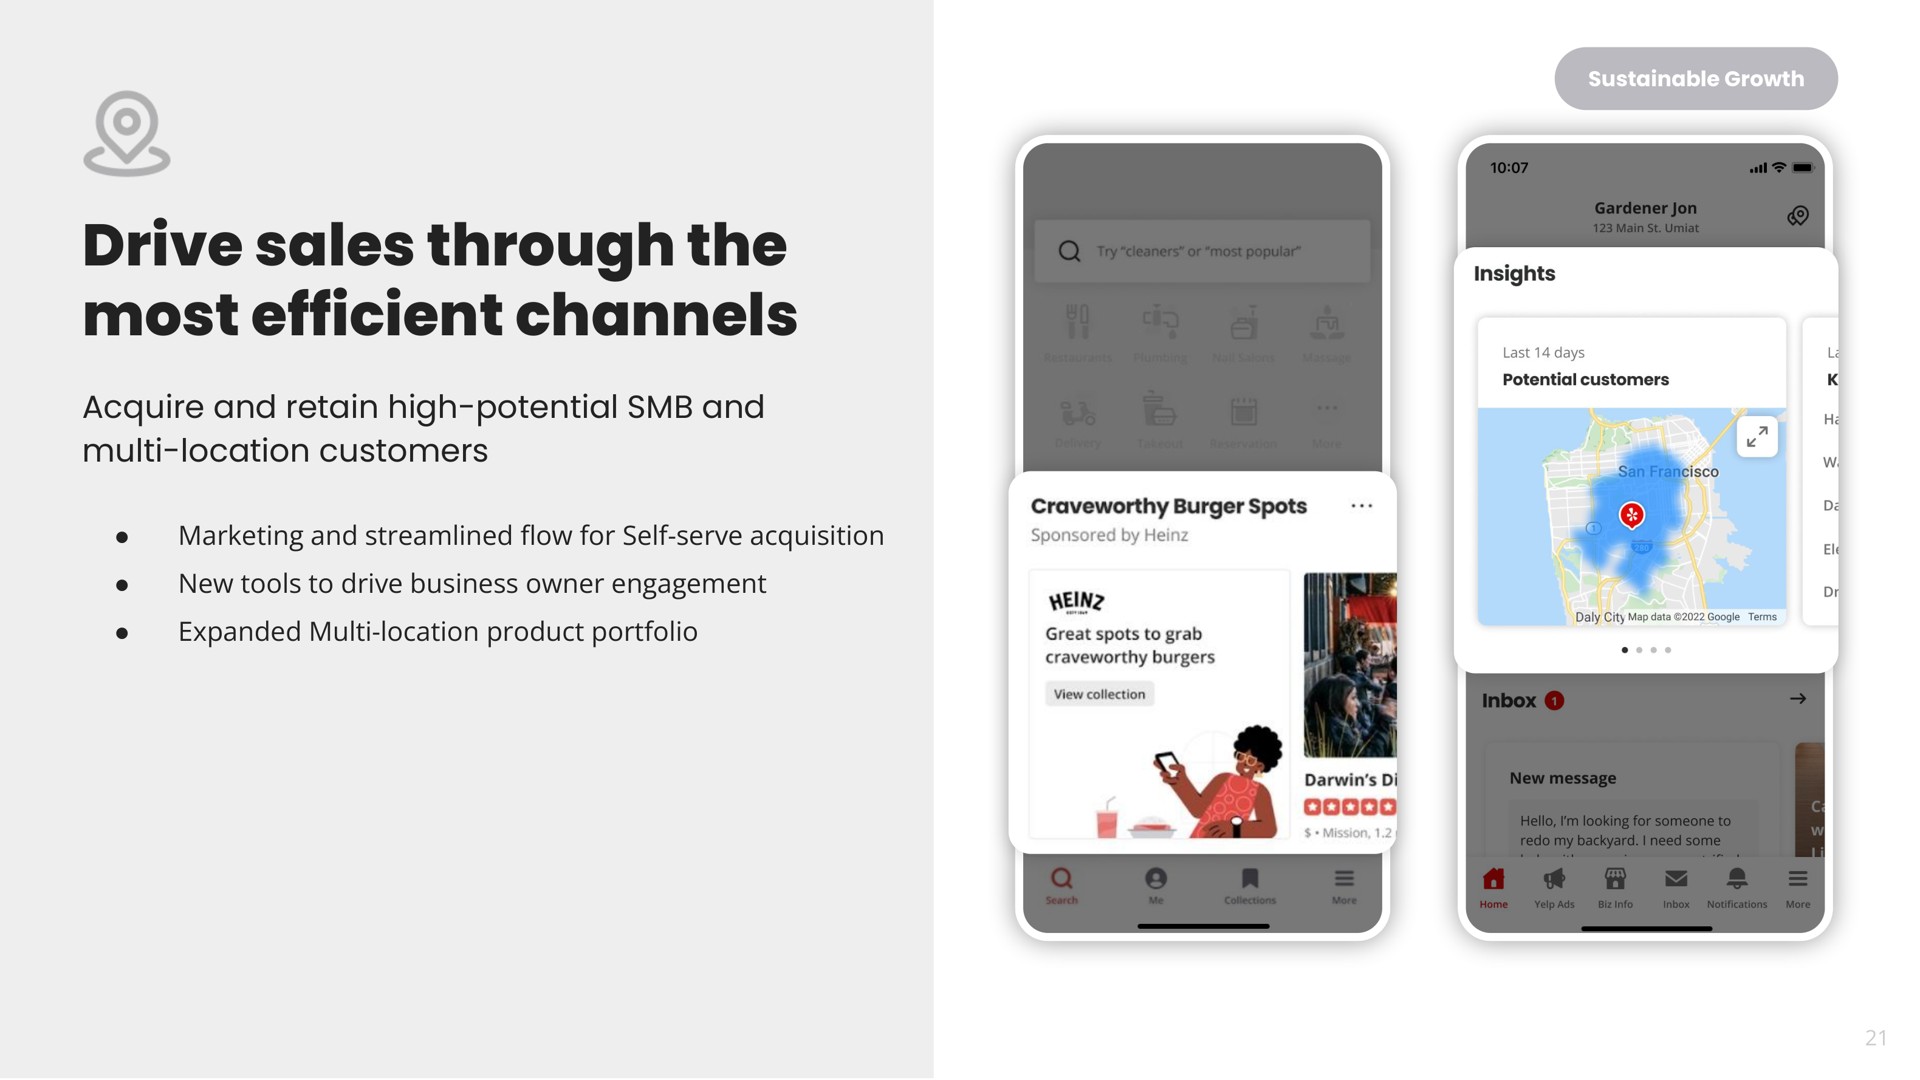 drive sales through the most efficient channels | Yelp